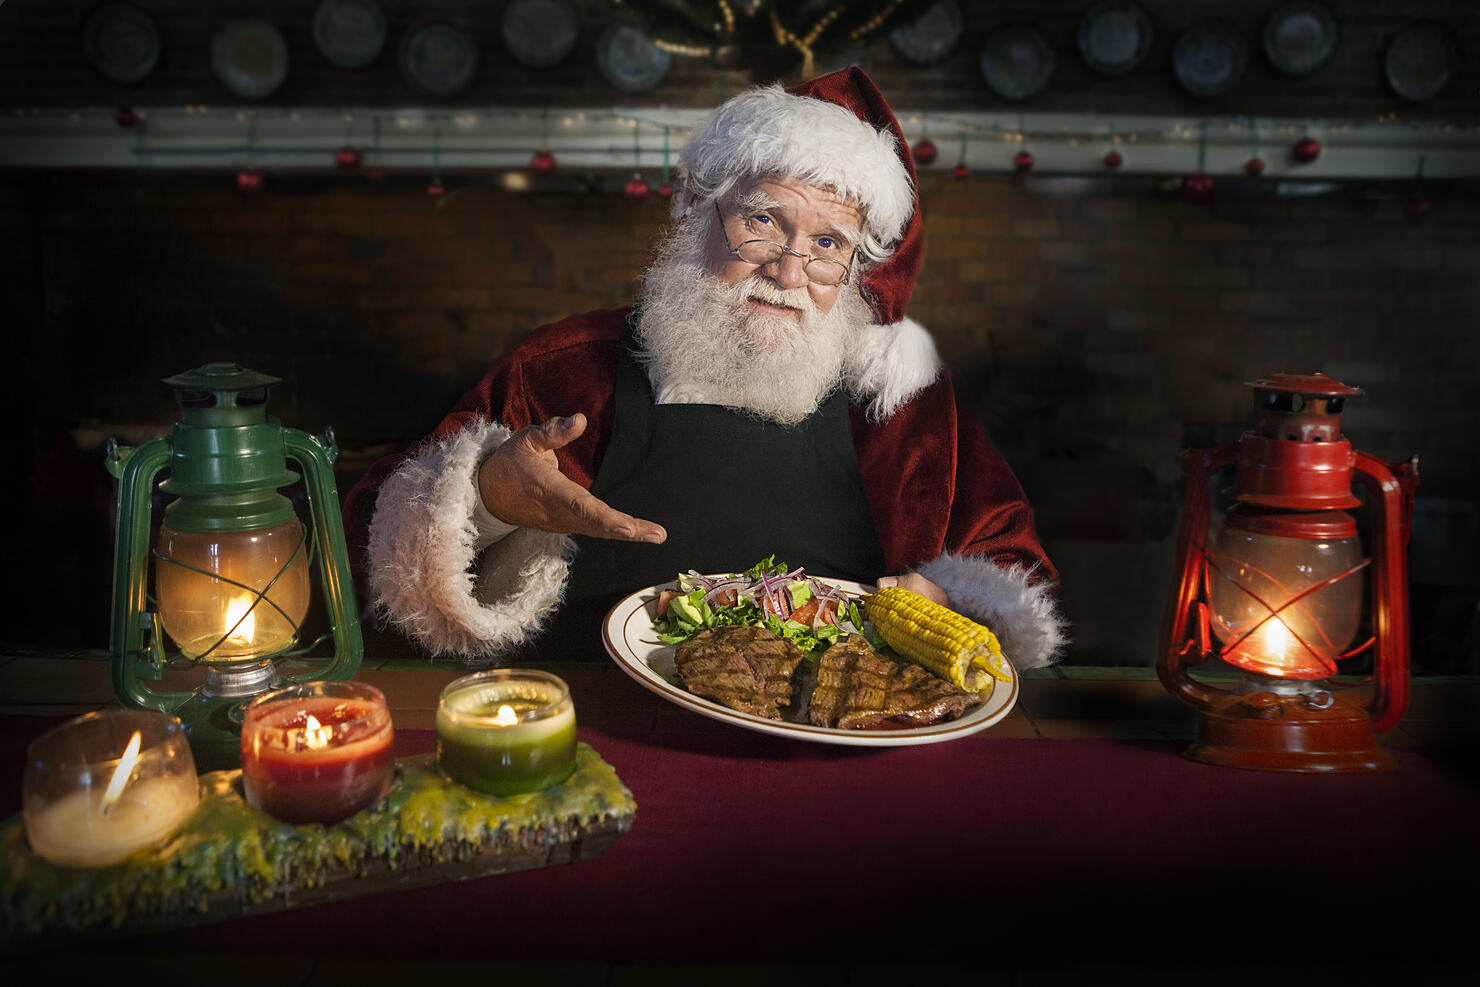 Chef Santa Claus holding a delicious grilled steak dish accompanied with corn and salad in a cozy kitchen counter lit by a candles and oil lamps